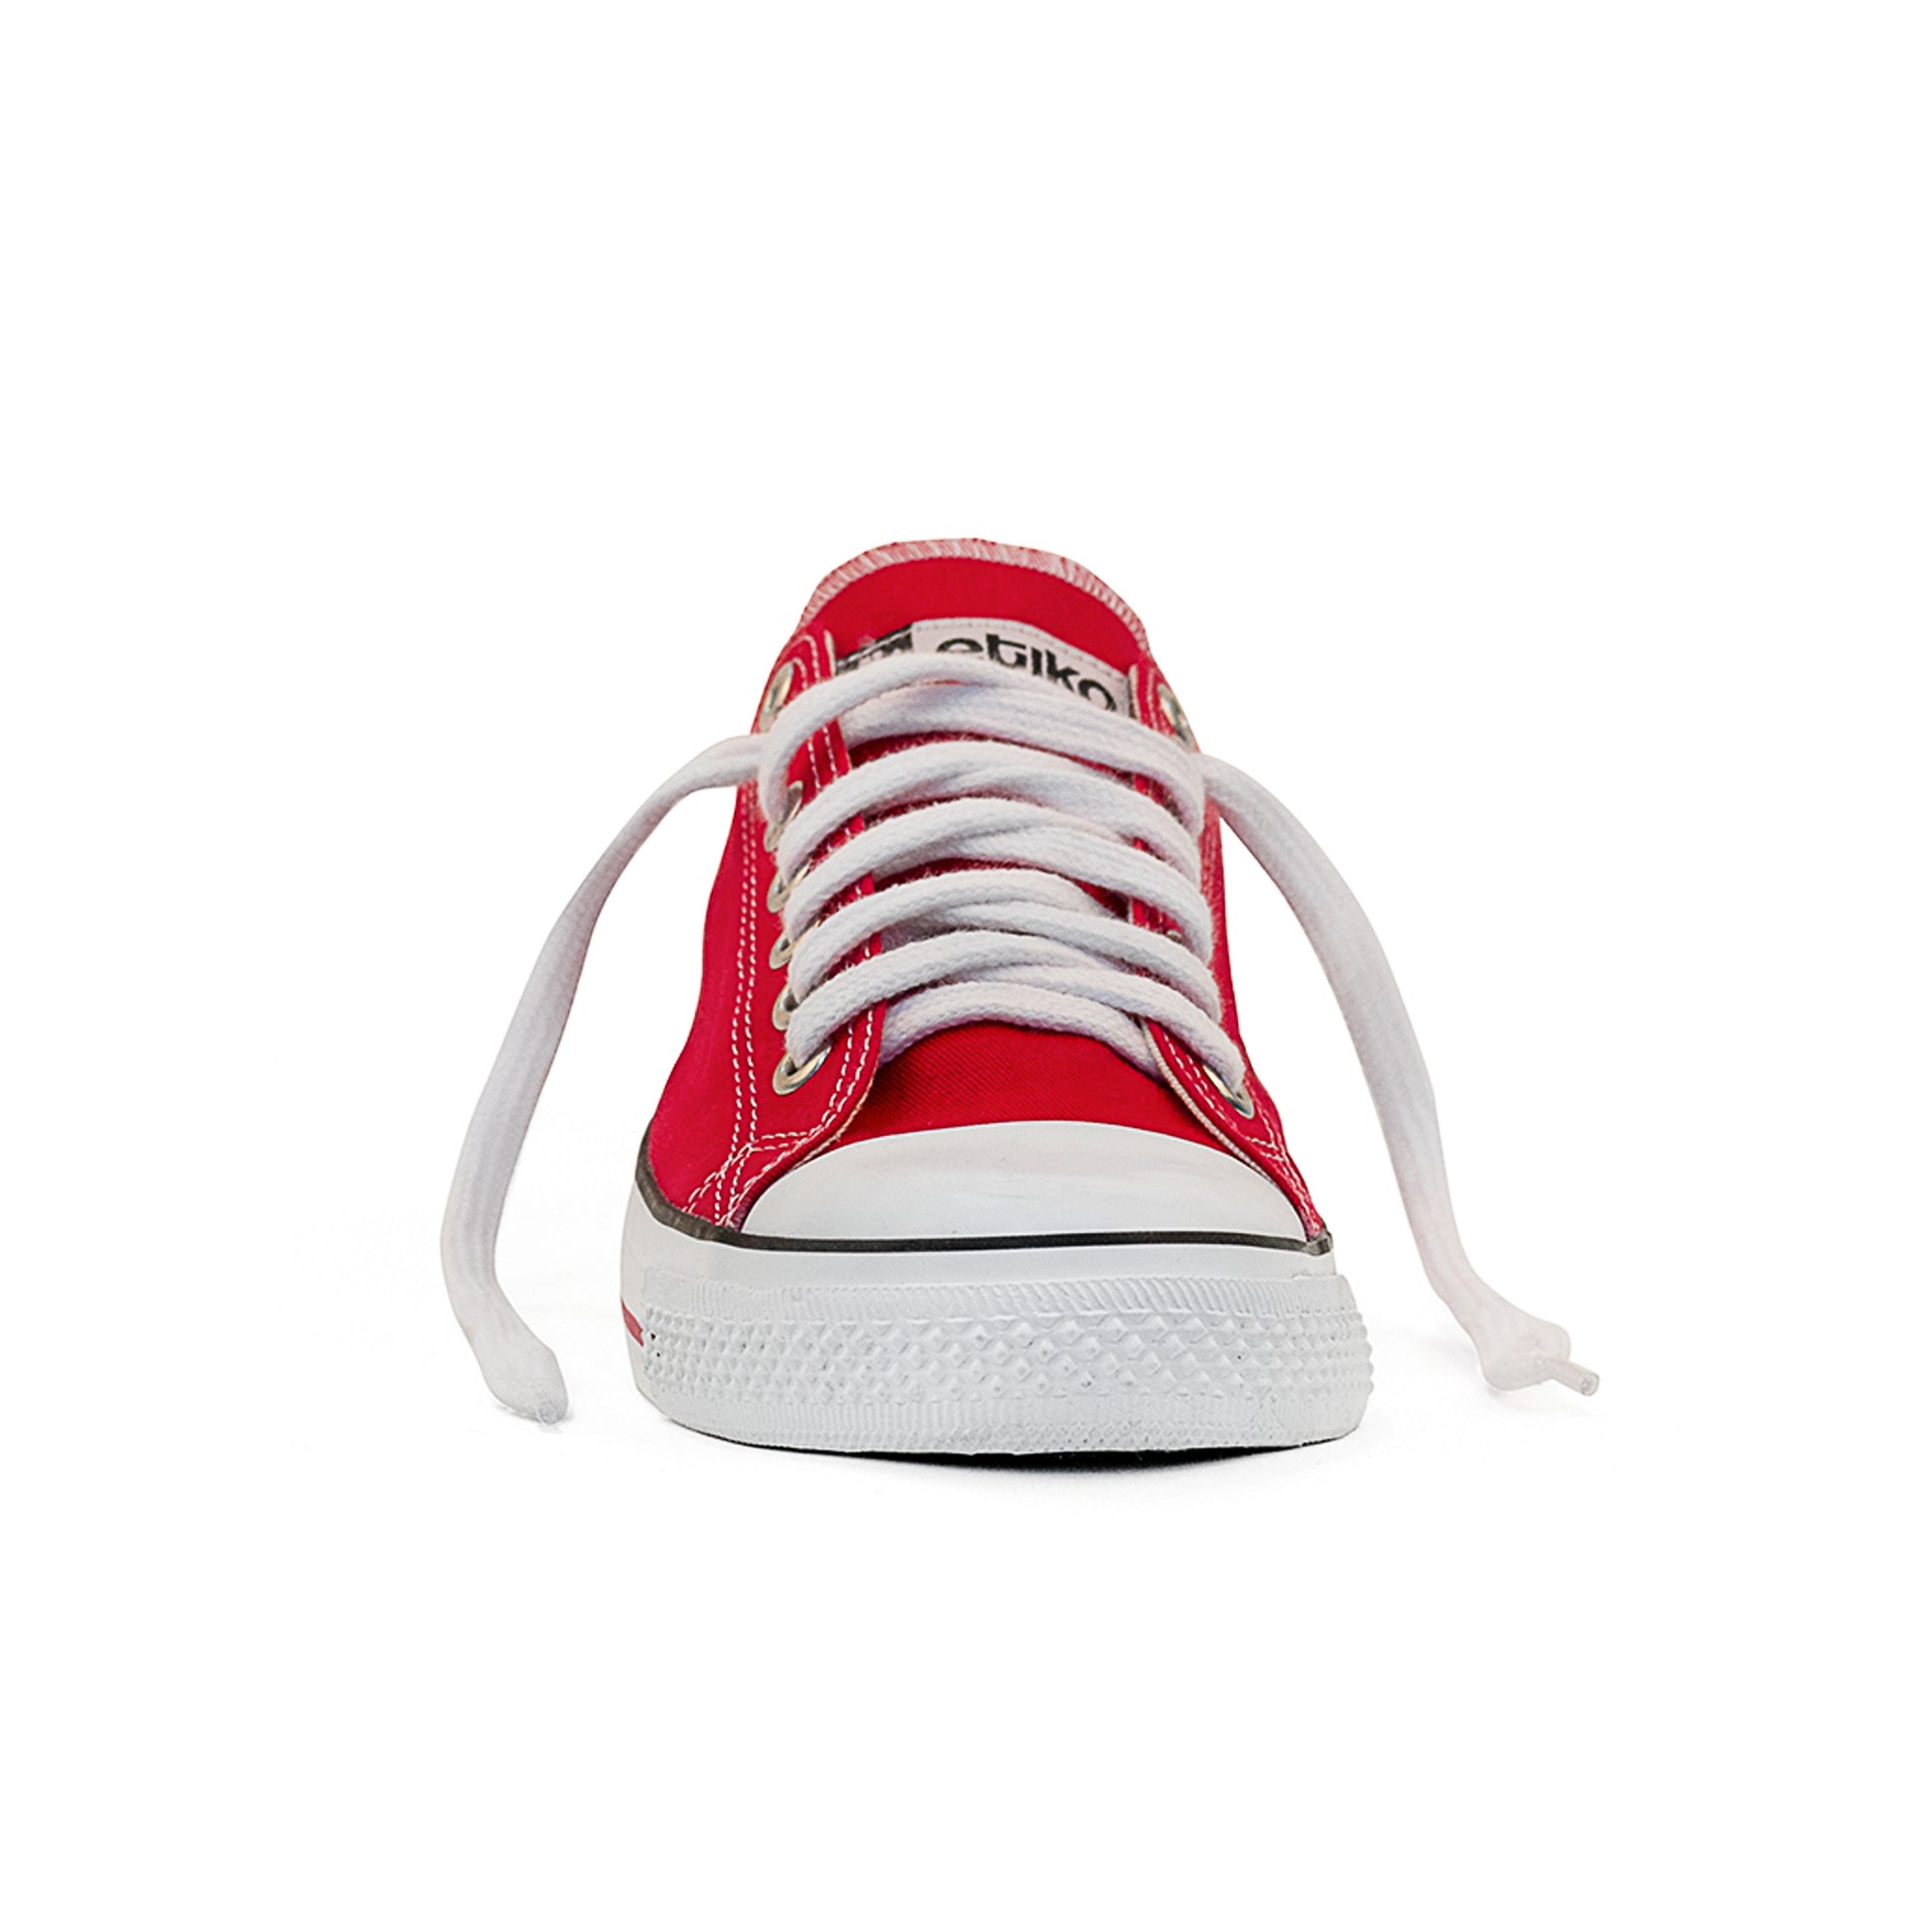 Etiko Vegan Low Cut Red and White Sneakers Organic and Fairtrade Certified Ethical Sneakers